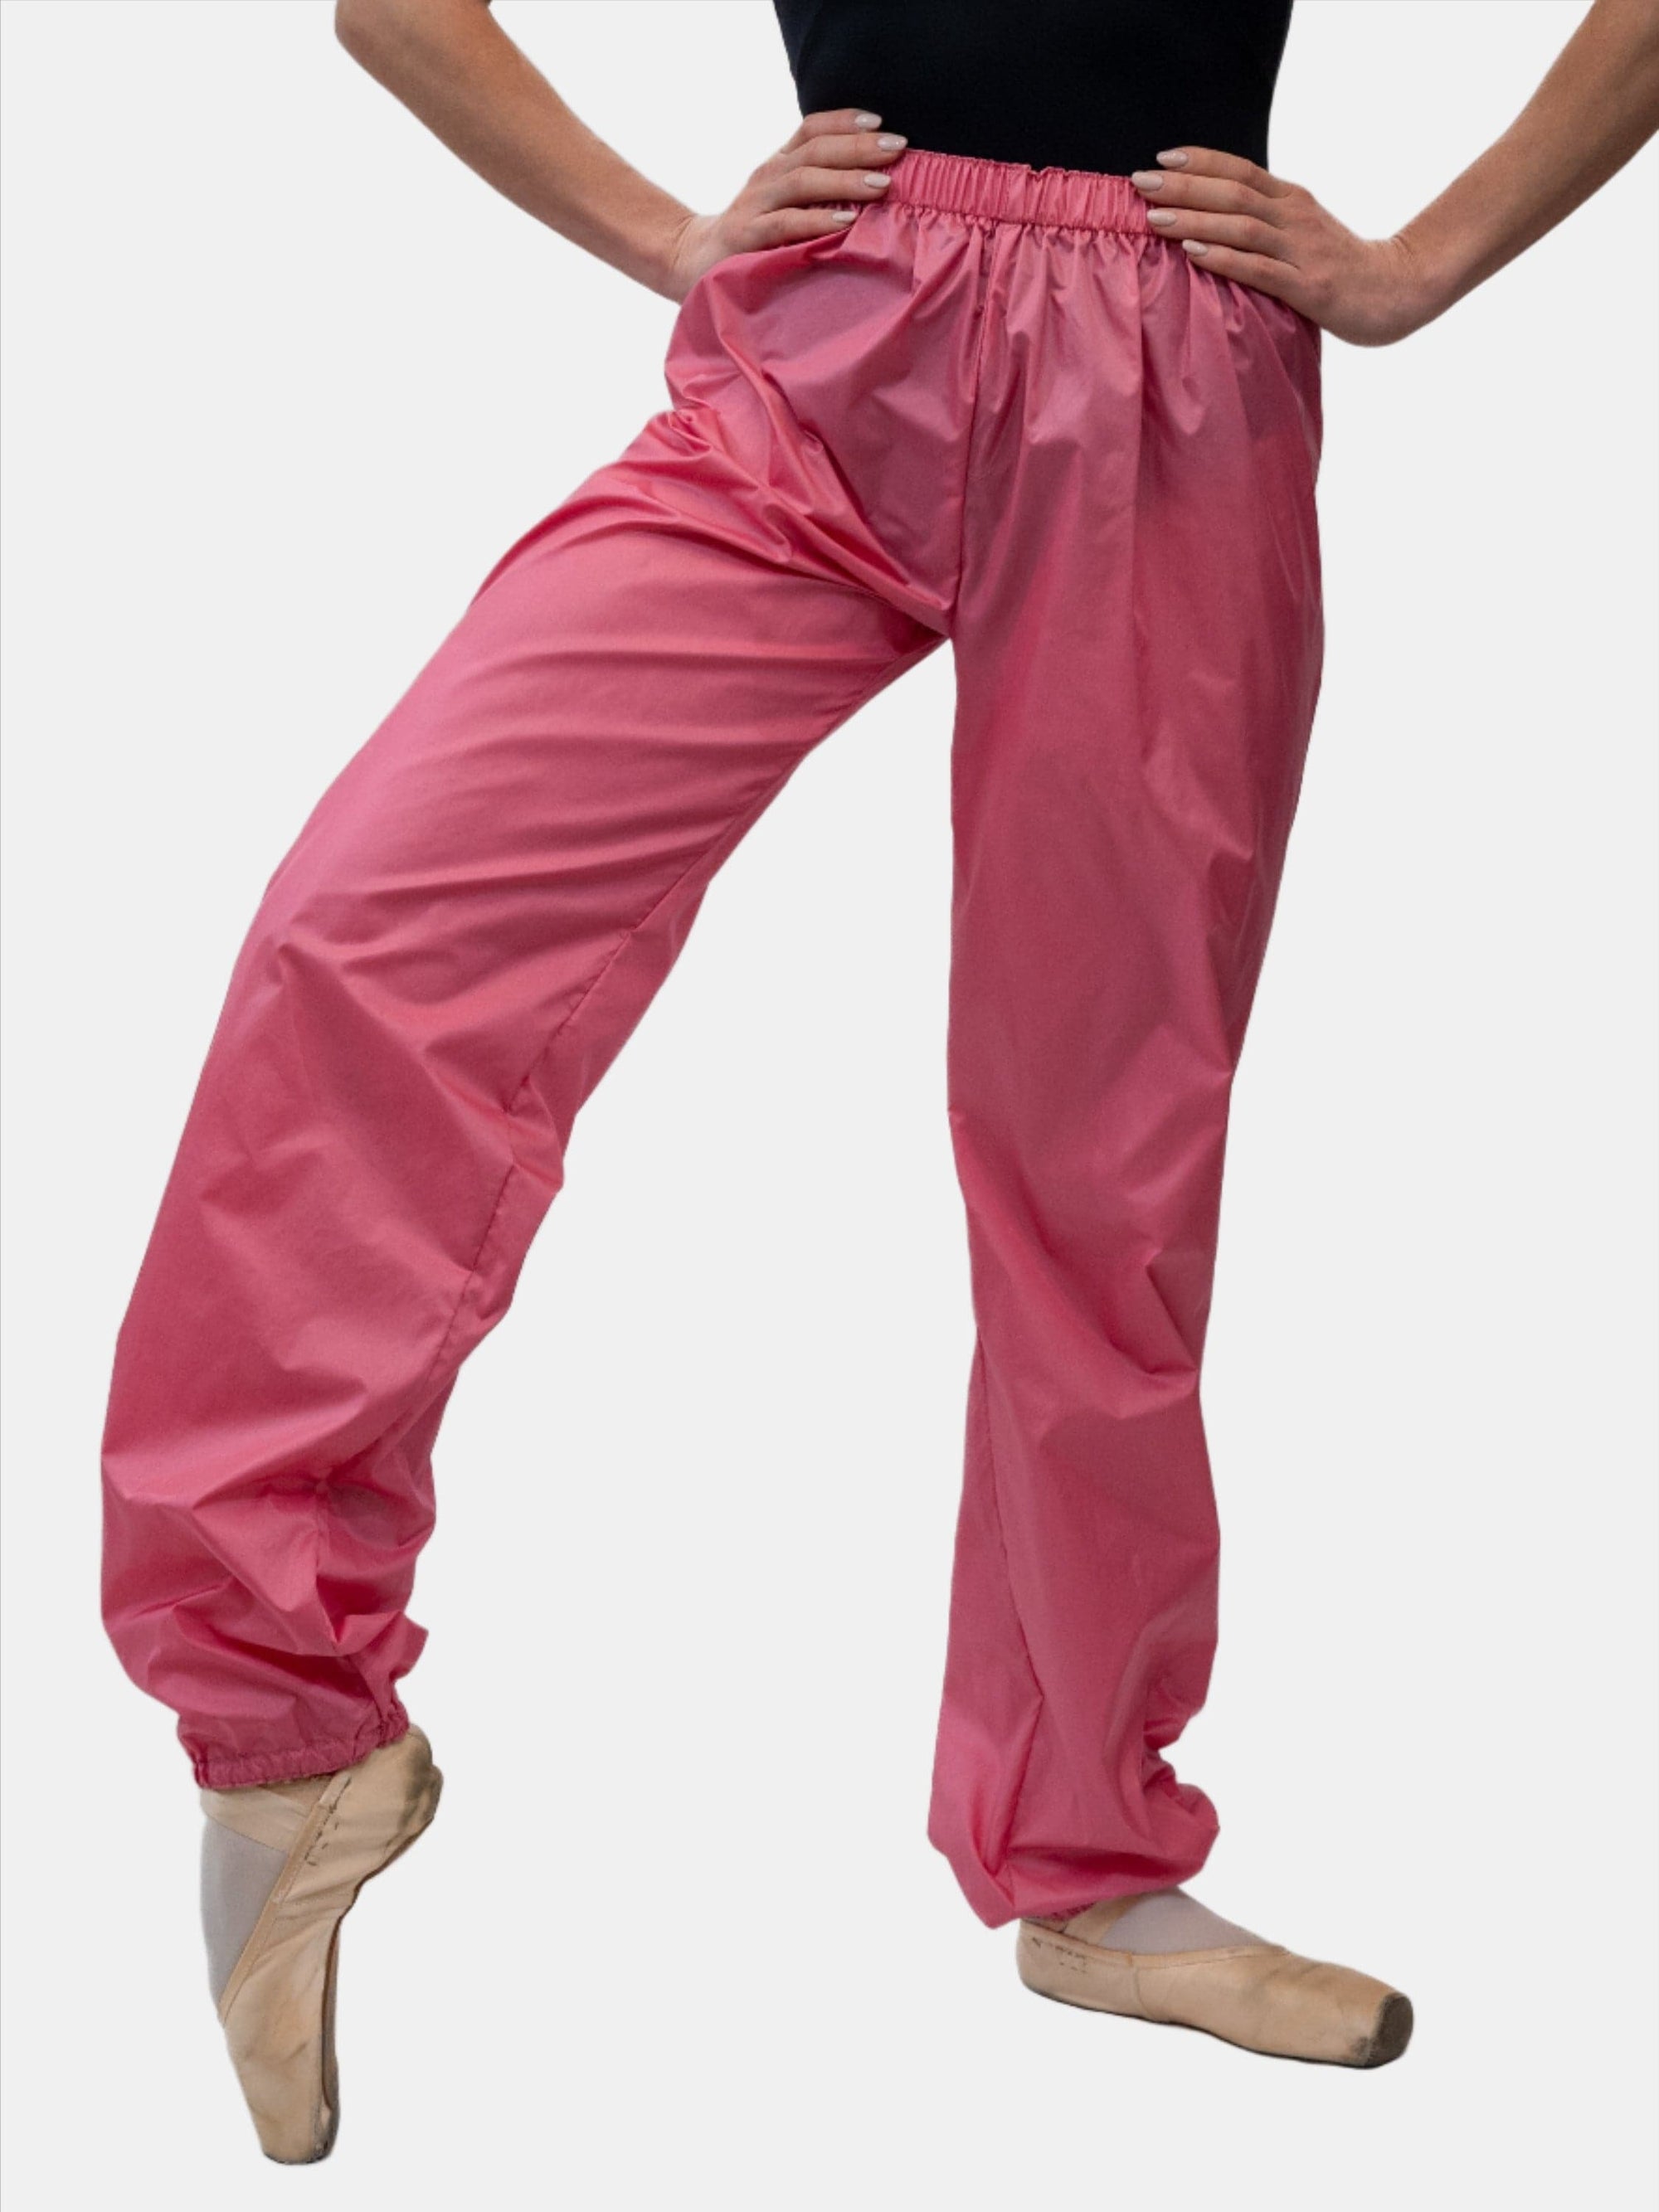 MICHI, Pants & Jumpsuits, Vintage Satin Nylon Workout Pants Are Available  The Top Is Would Out